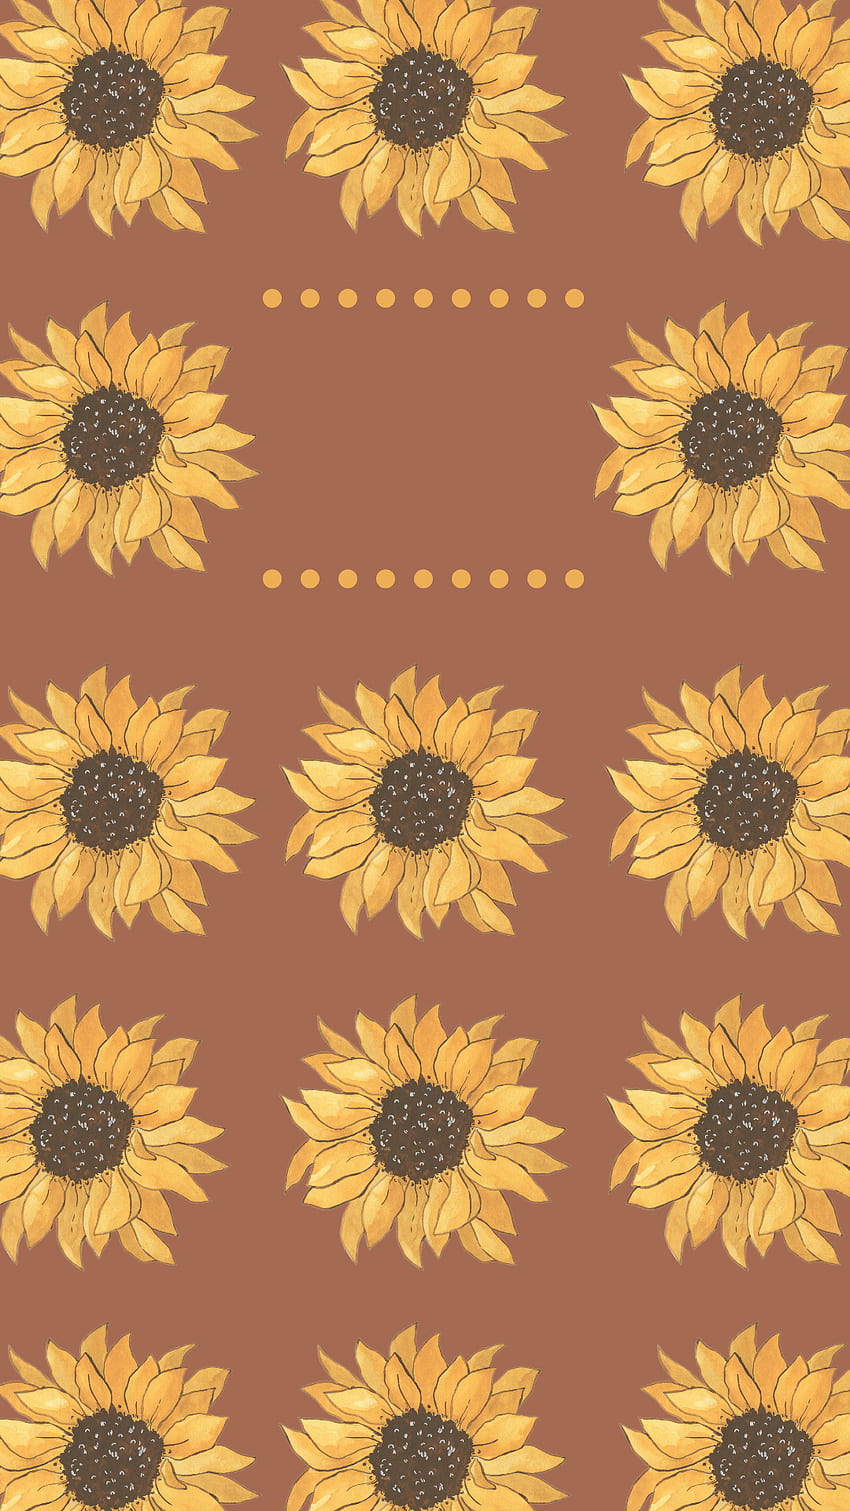 Daisy Sunflower Wallpaper Phone Lock APK for Android Download